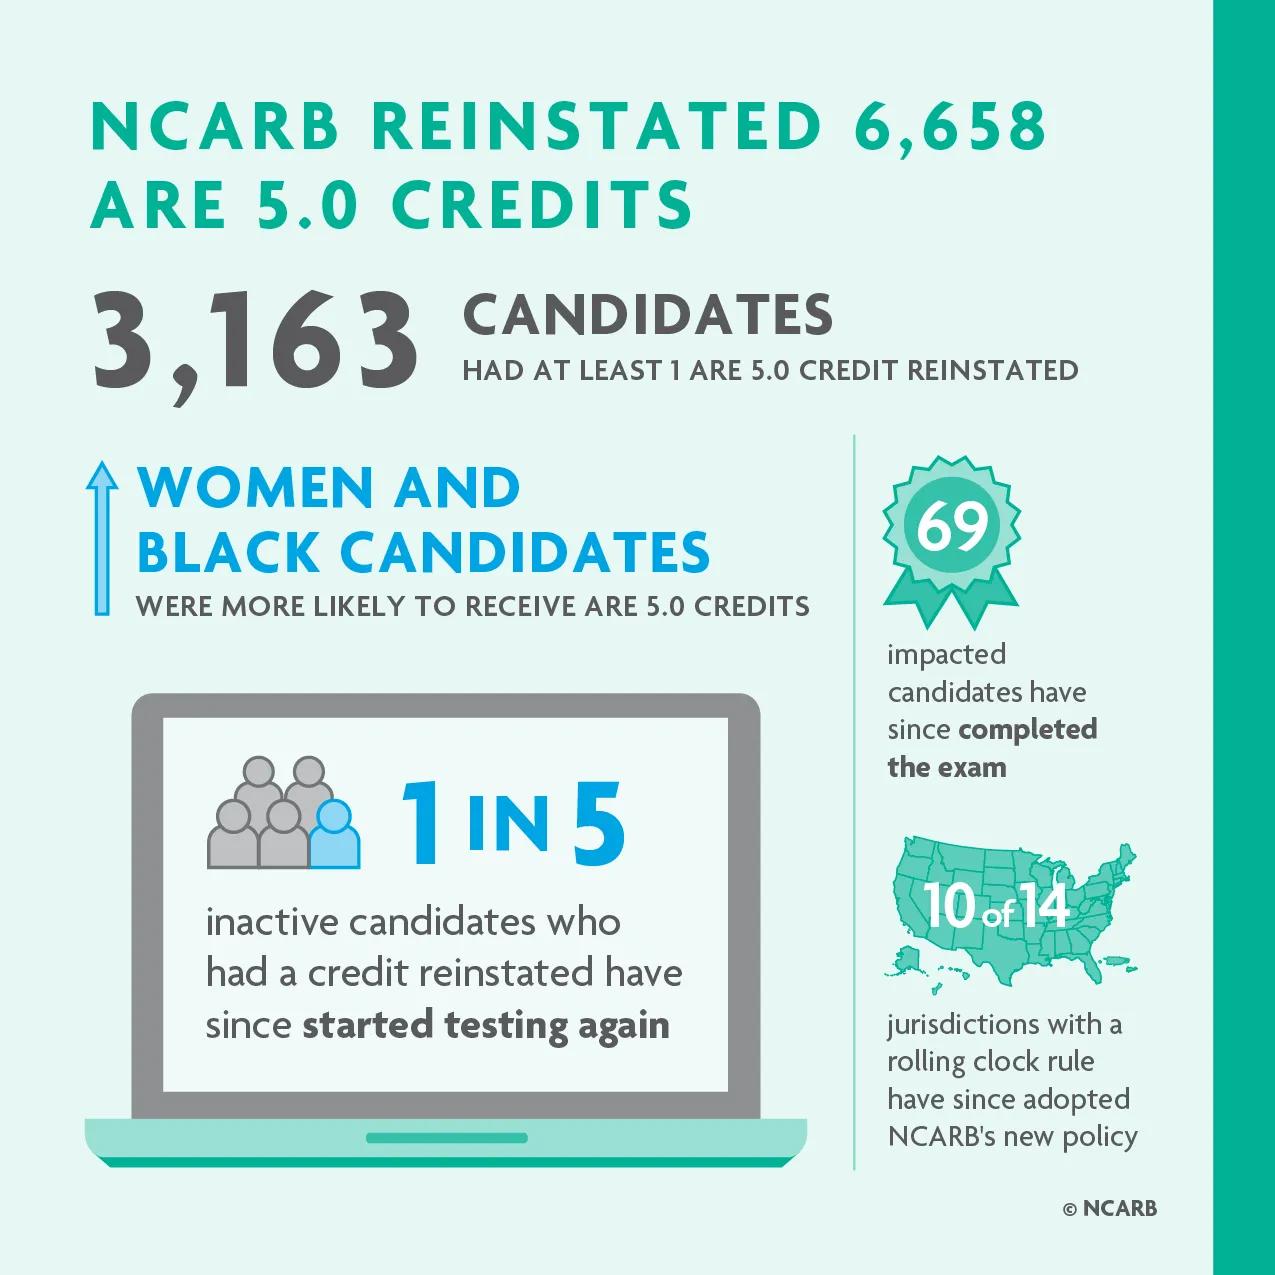 Over 3,000 candidates had at least one ARE 5.0 division reinstated as part of the rolling clock retirement. For help with data accessibility, contact communications@ncarb.org. 